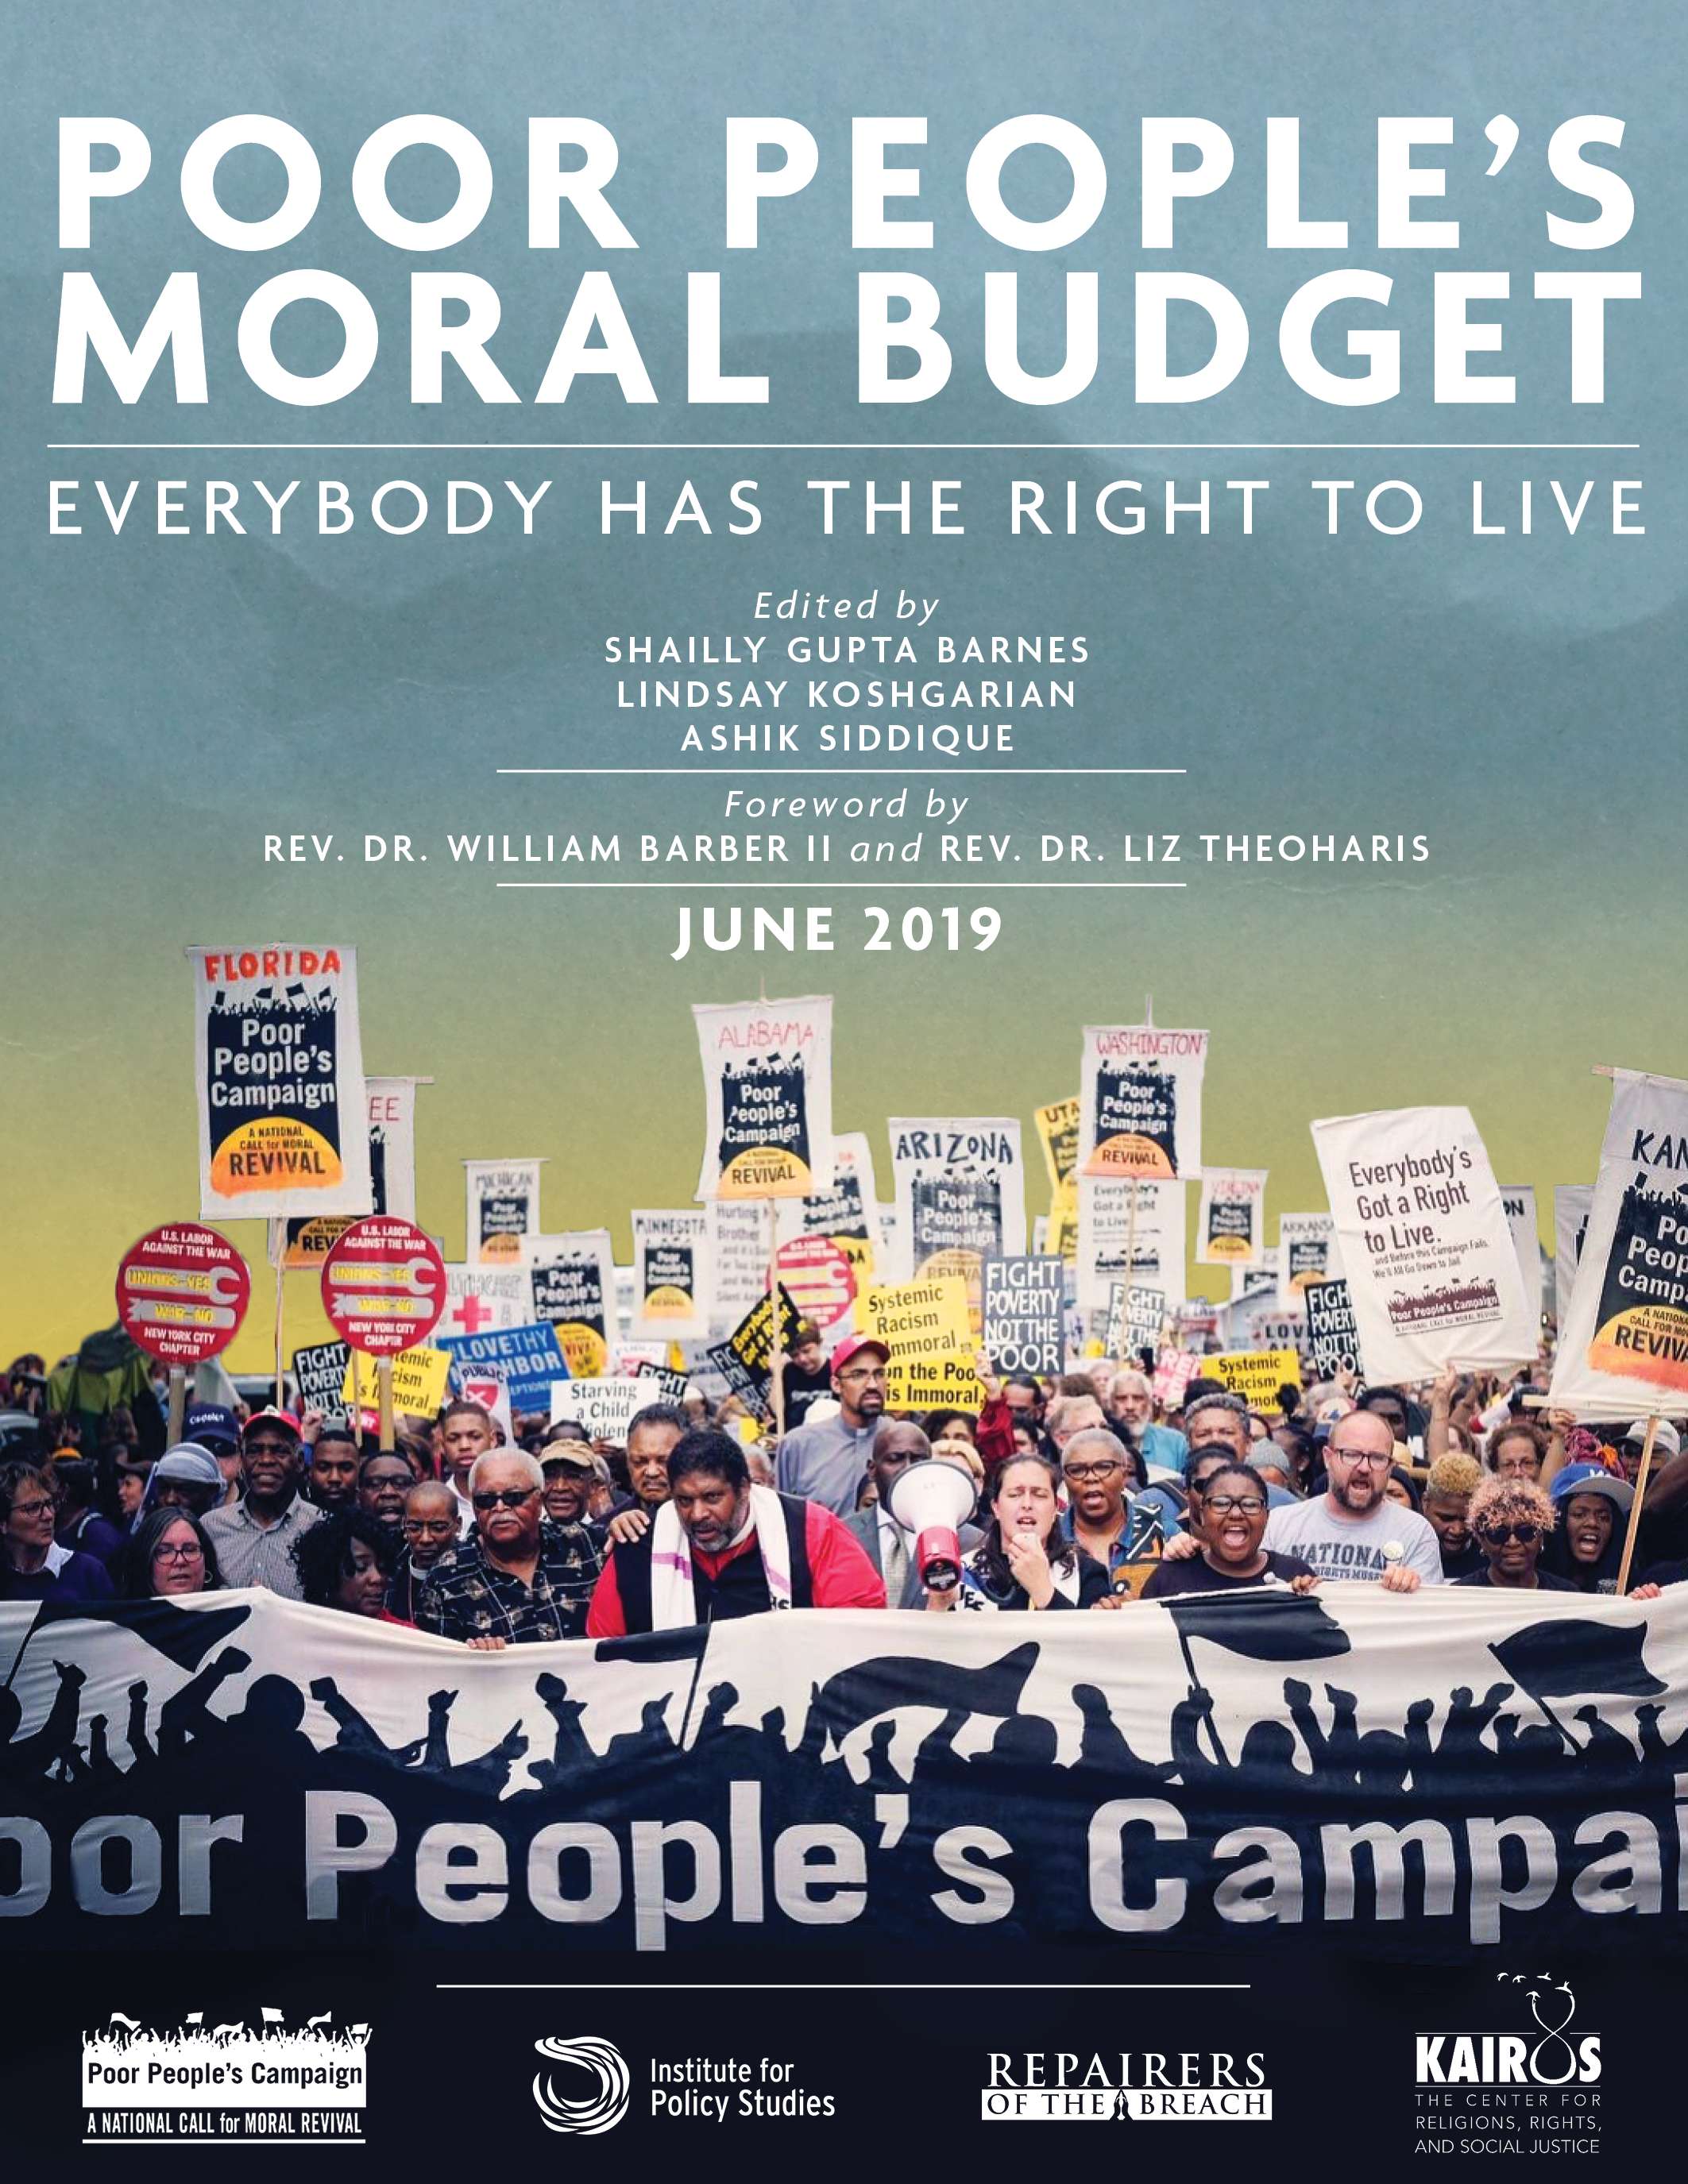 Report: Poor People’s Campaign Moral Budget